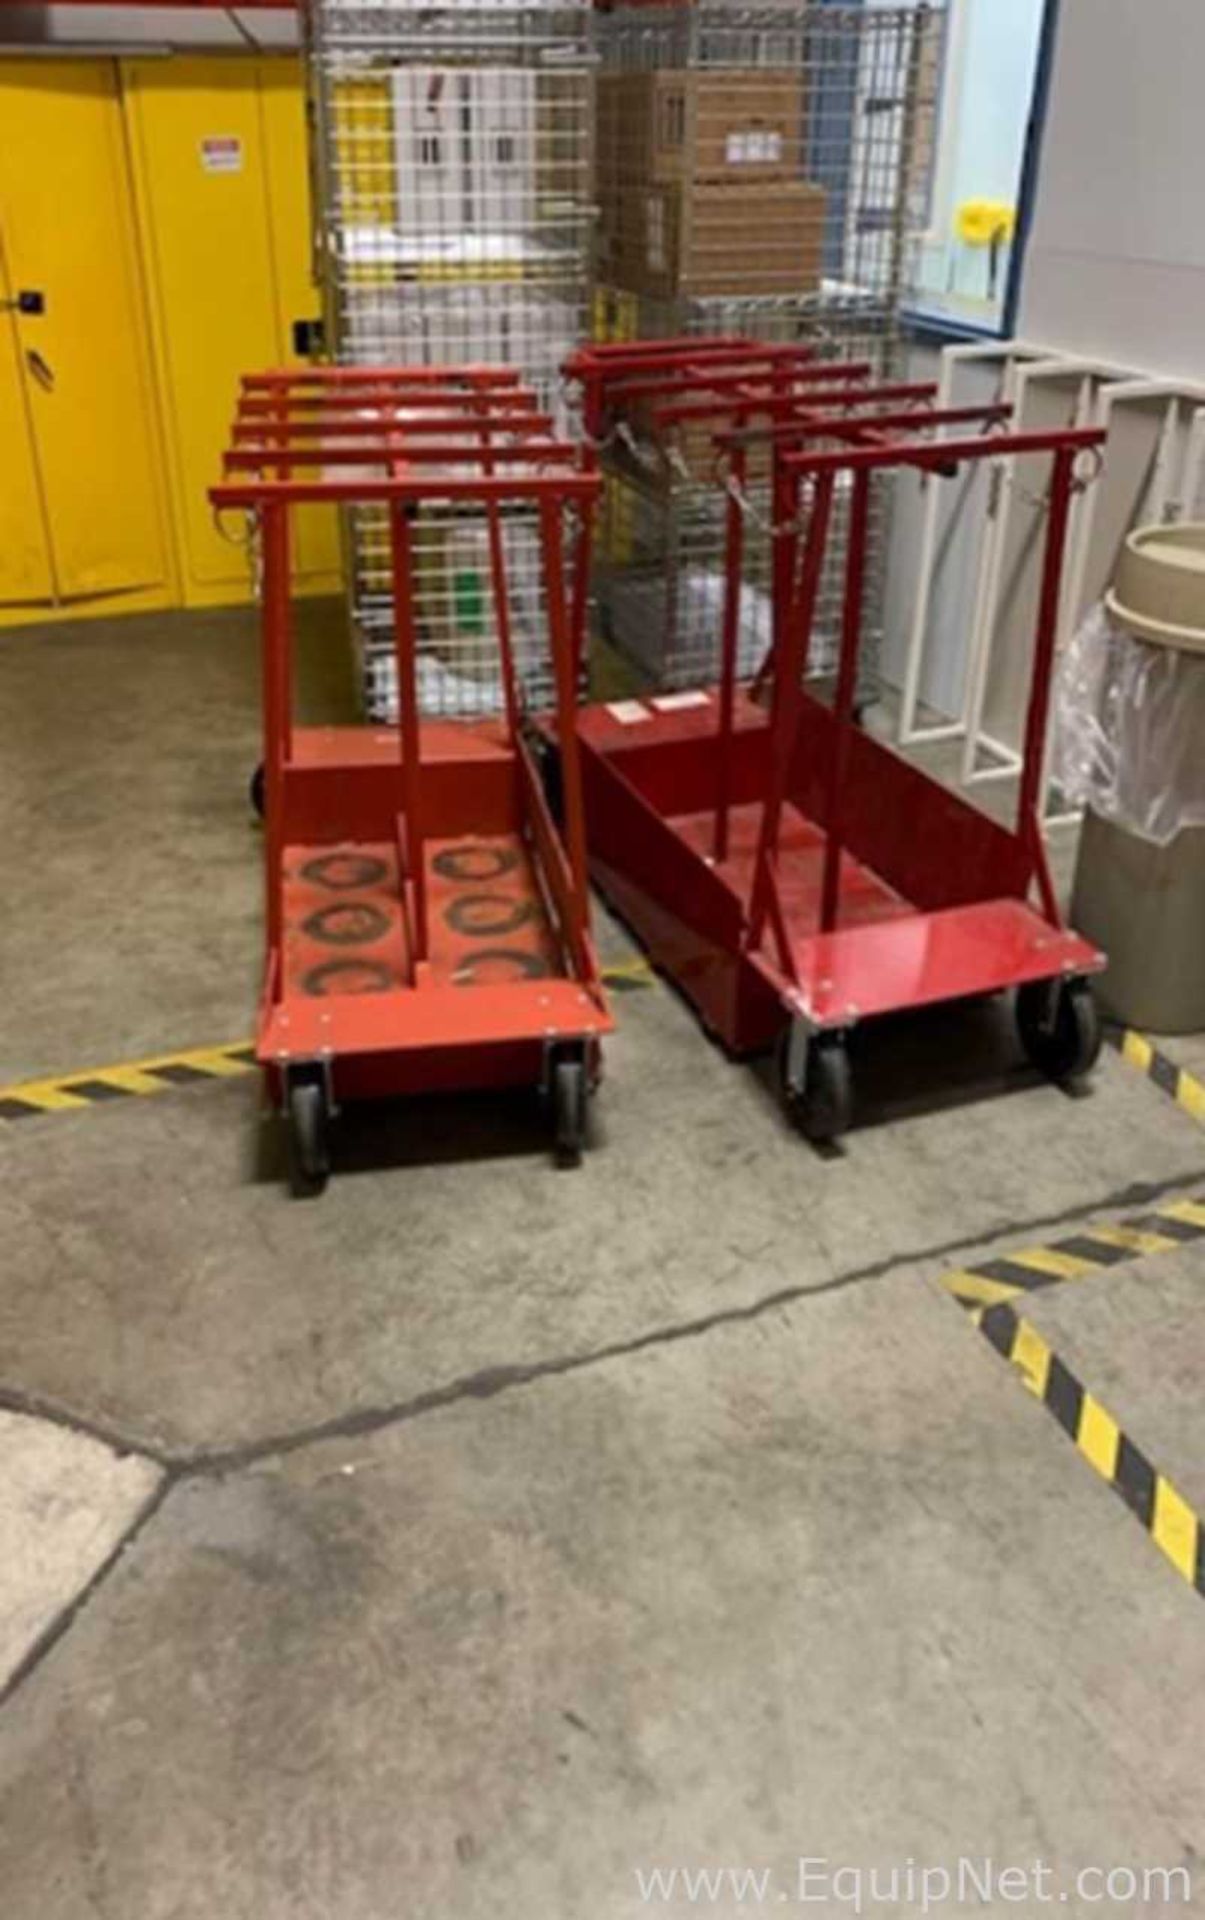 DESCRIPTION: Lot of 2 Oxygen Bottle Carts with 8 Bottle Capacity and Safety Chains EQUIPNET - Image 3 of 4